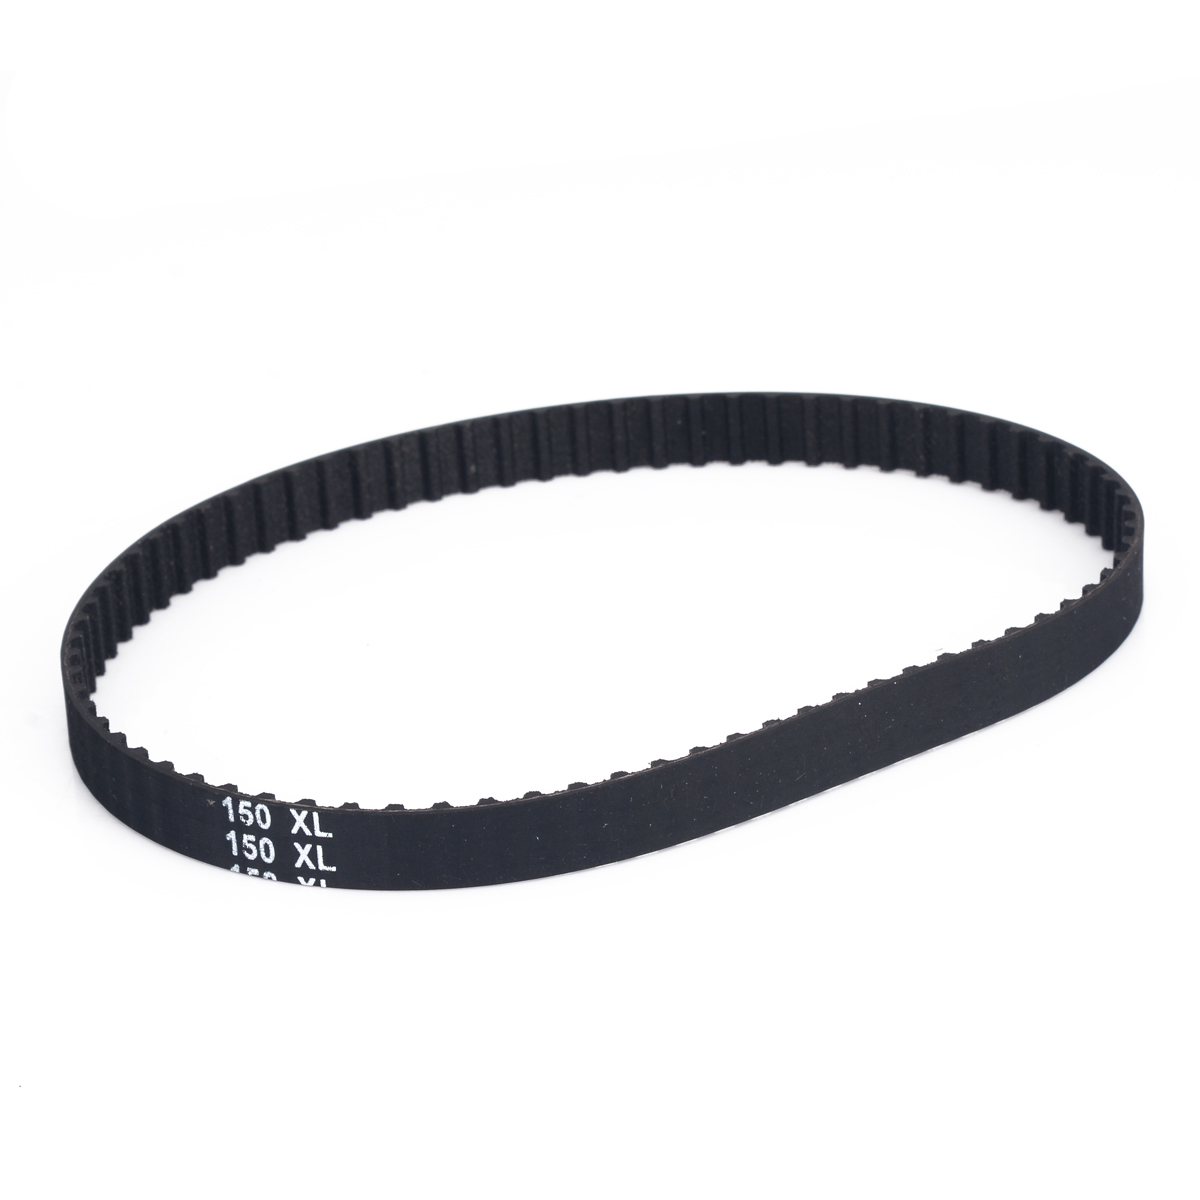 1pc 10mm Transmission Belt 150XL037 Black Color Synchronized Timing Belt 75 Teeth Cogged Rubber Geared Drive Belts